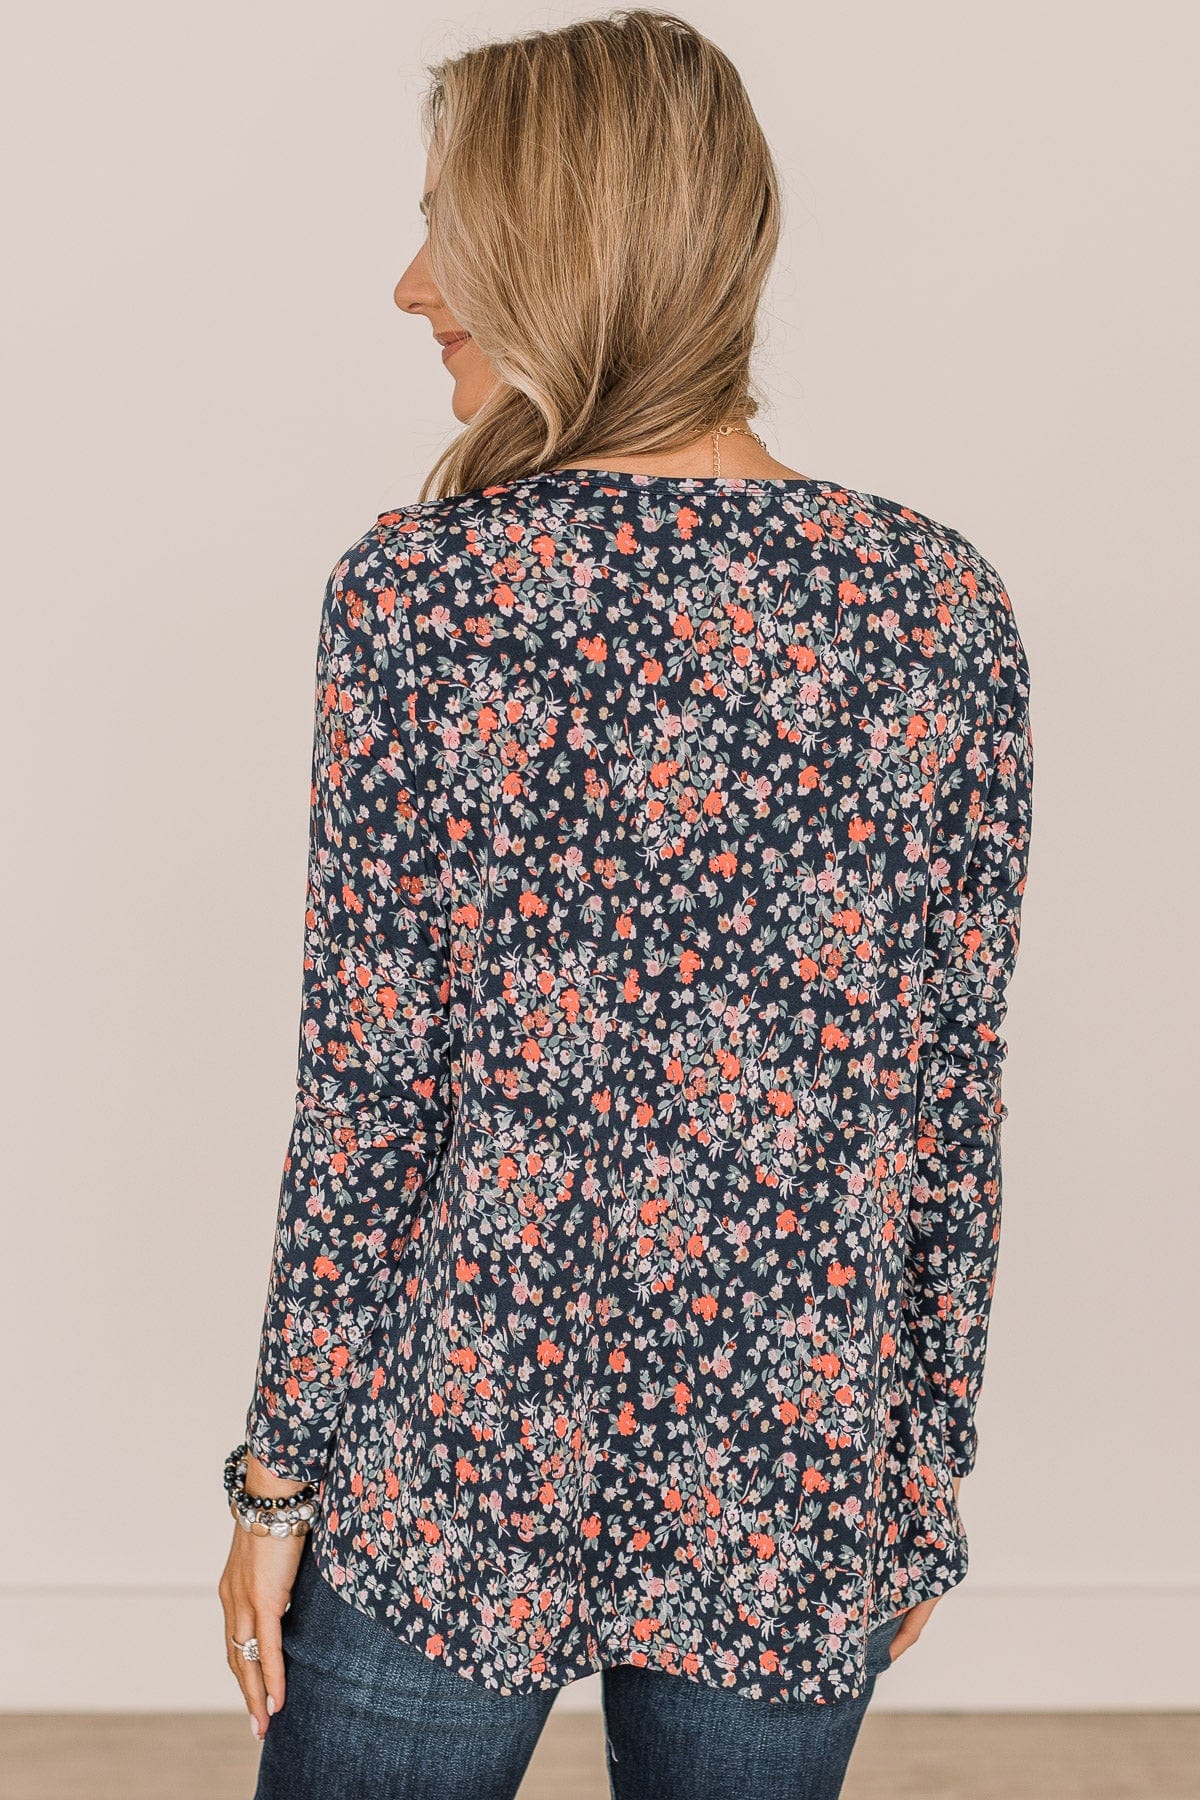 Be The Best Floral Long Sleeve Top- Navy